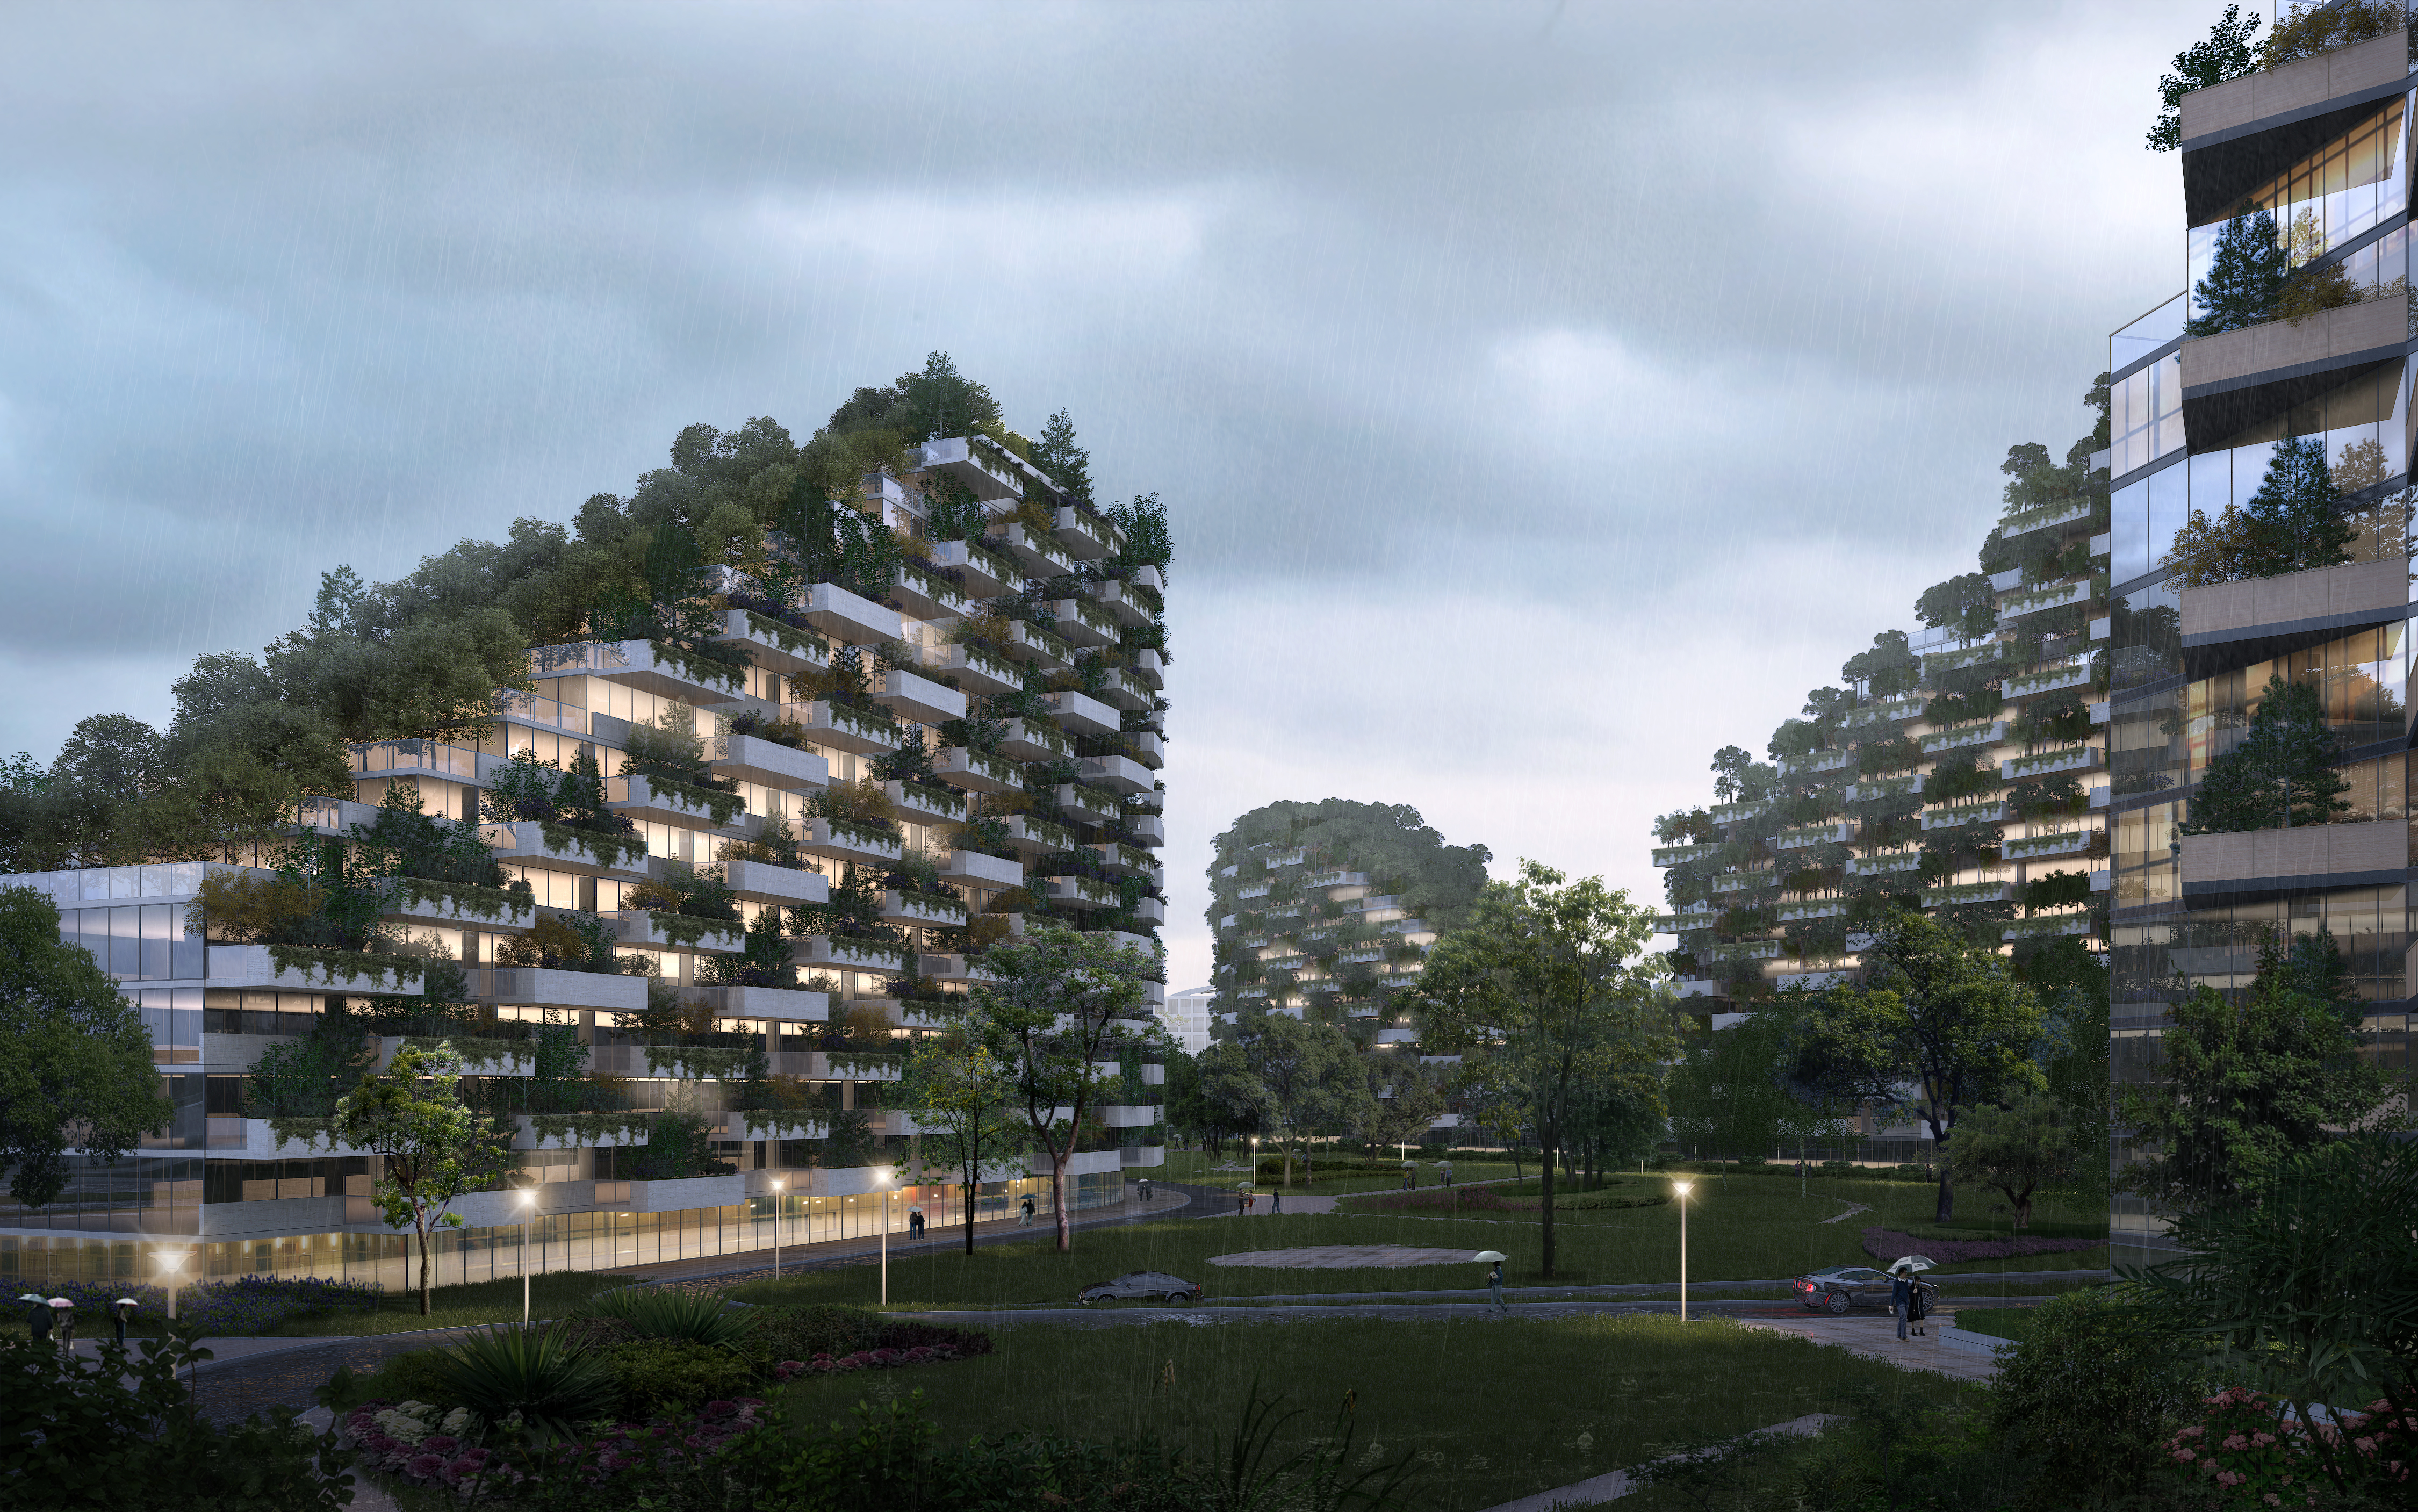 China unveils plans for pollution-eating 'Forest City' - CNN Style